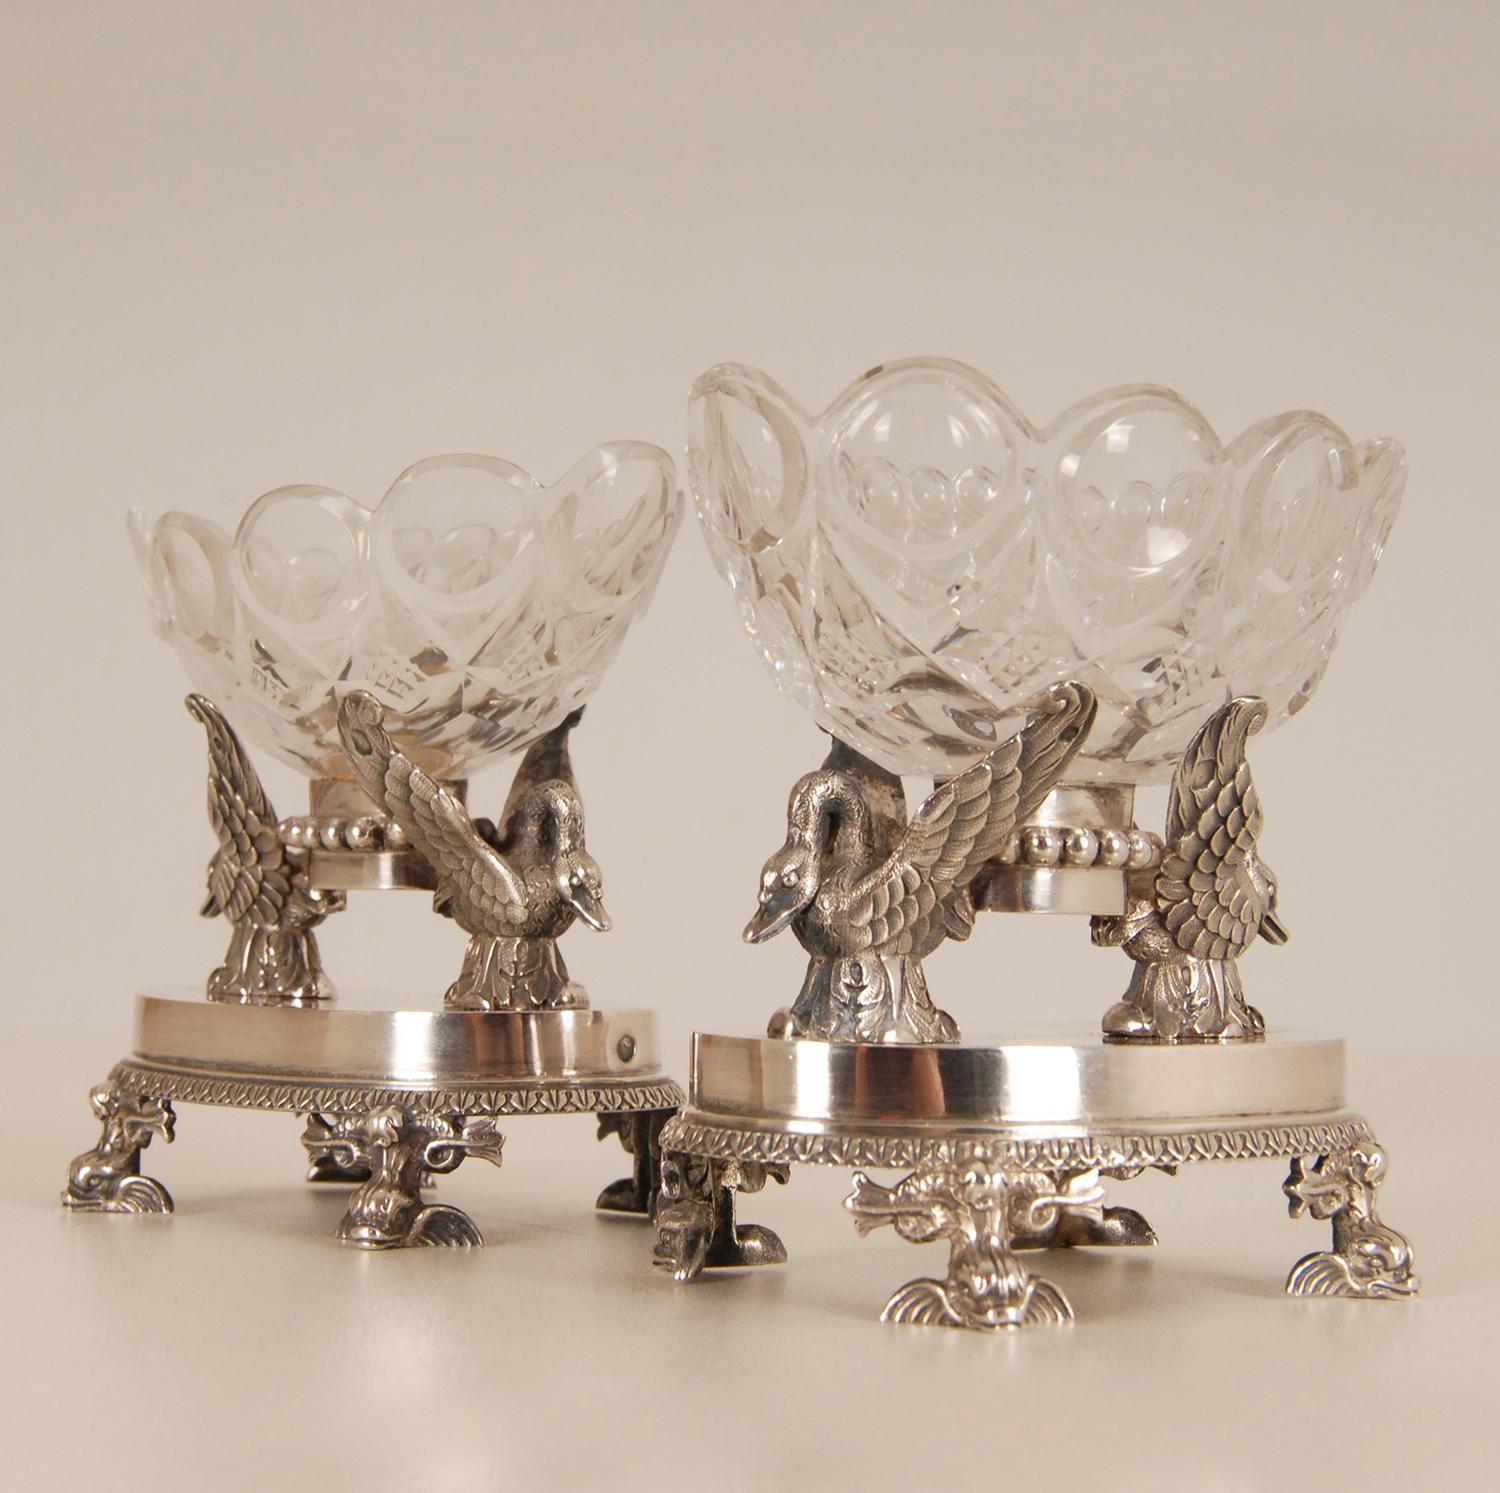 18th Century Empire Silver Baccarat Crystal Salt Cellars  F. Durand Napoleonic  For Sale 4